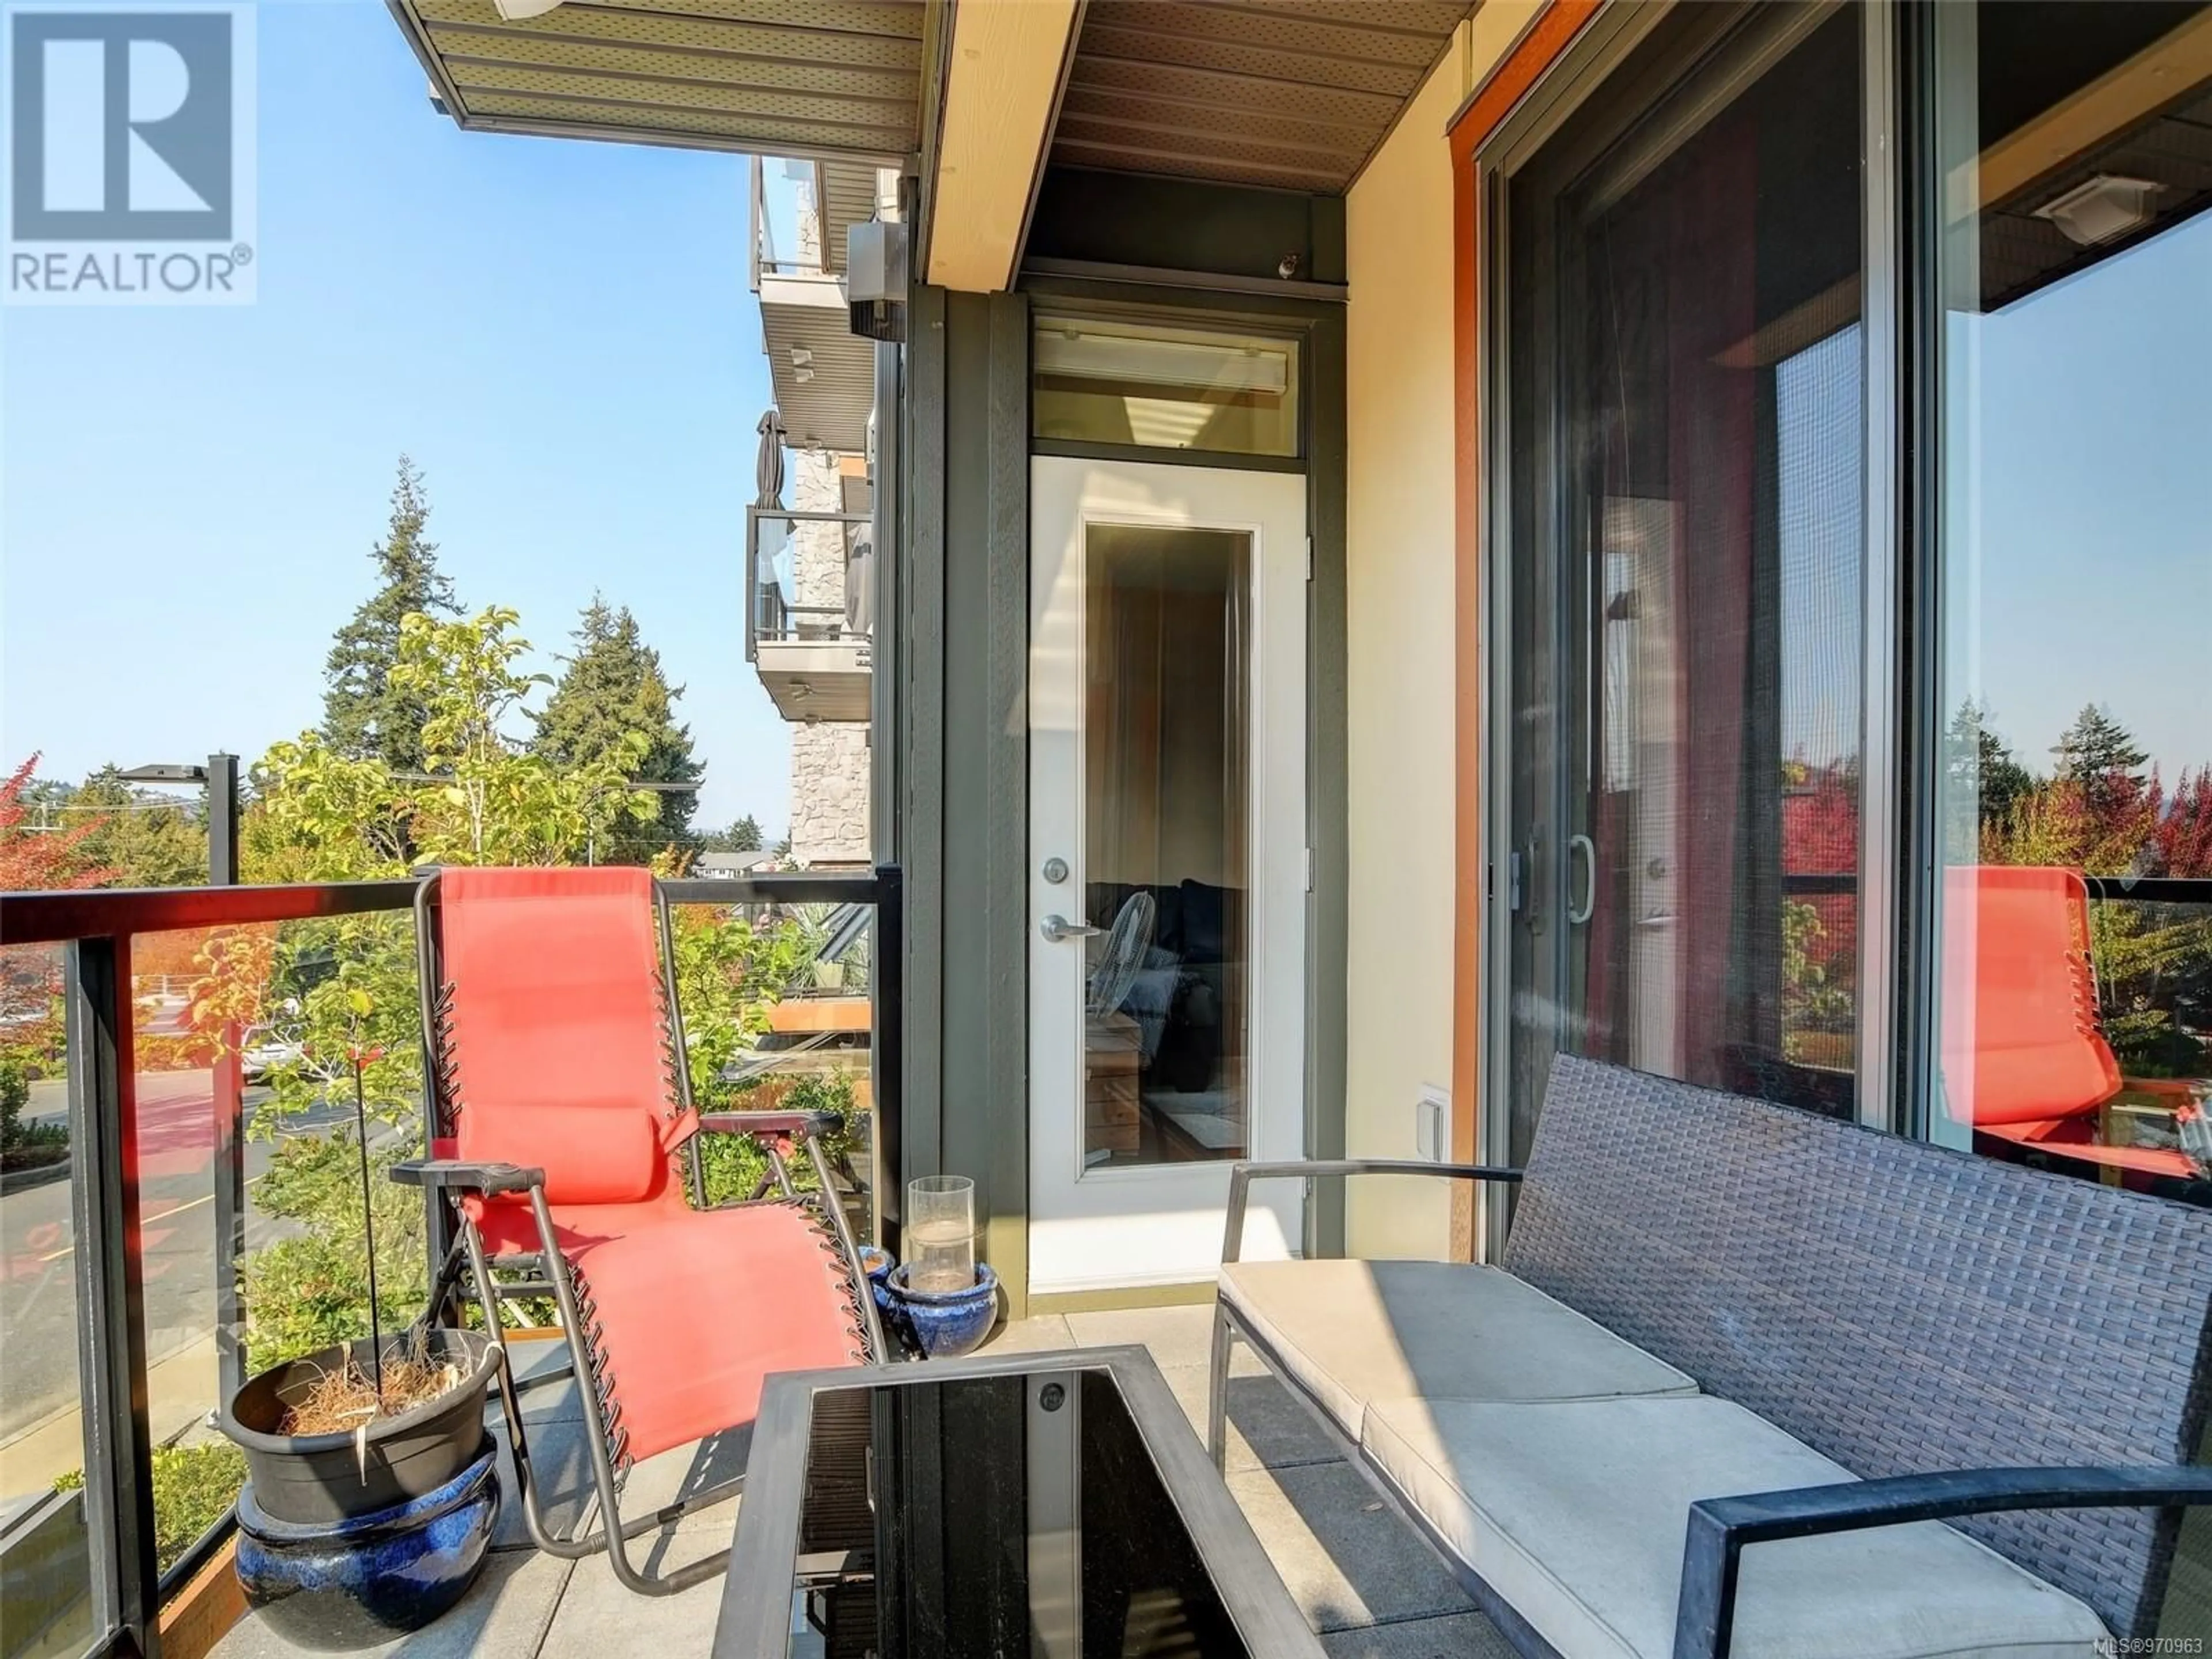 Balcony in the apartment for 103 3210 Jacklin Rd, Langford British Columbia V9B0J5